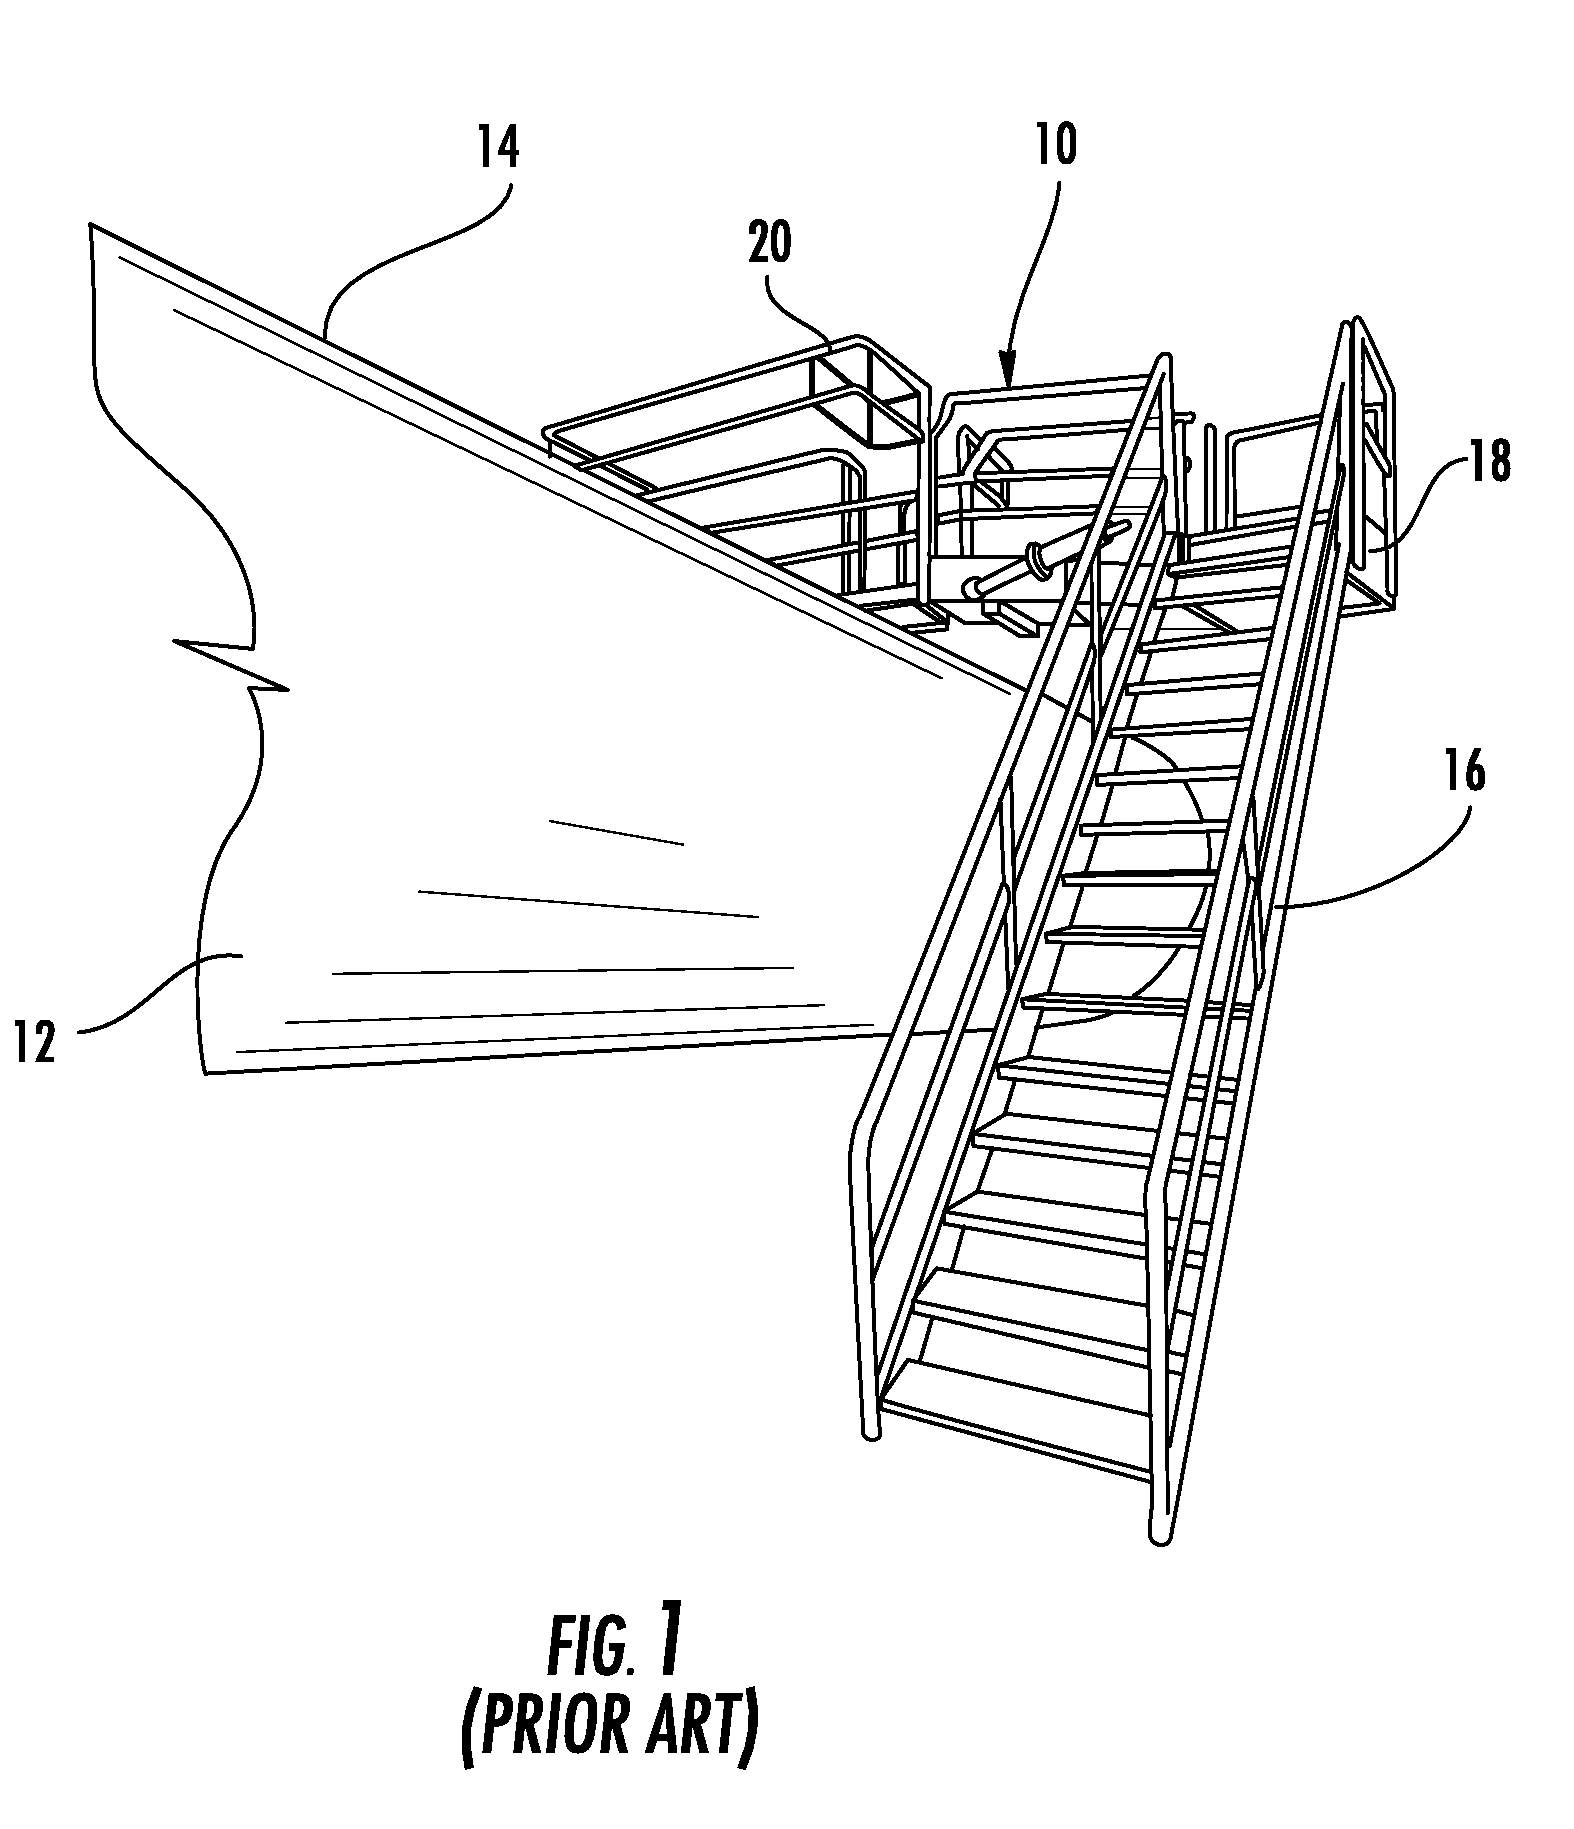 Fall restraint equipment component and method for manufacturing the same